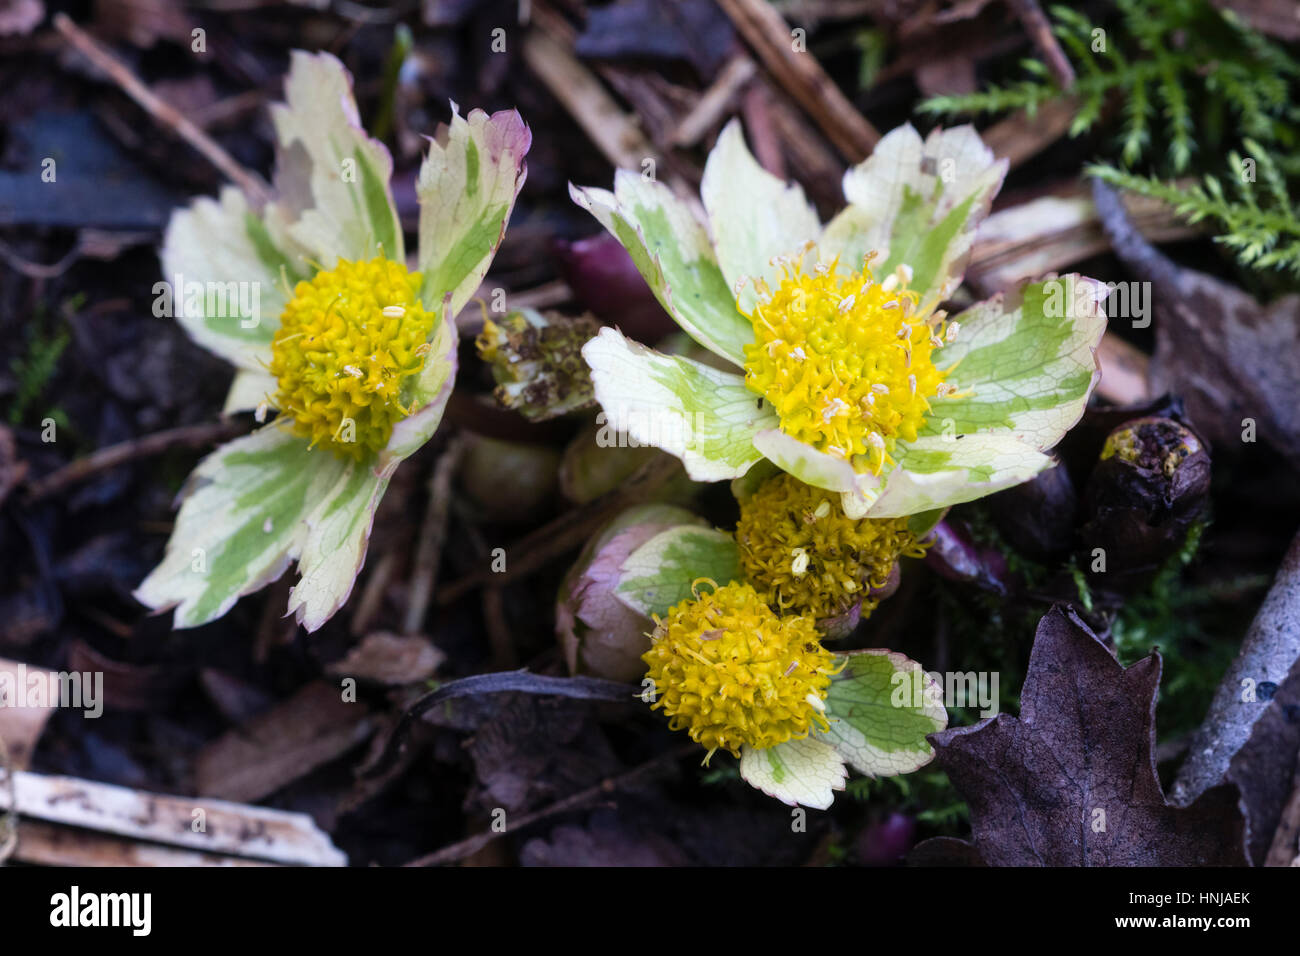 Hacquetia epipactis 'Thor', a variegated form of the late winter flowering dwarf woodland plant Stock Photo